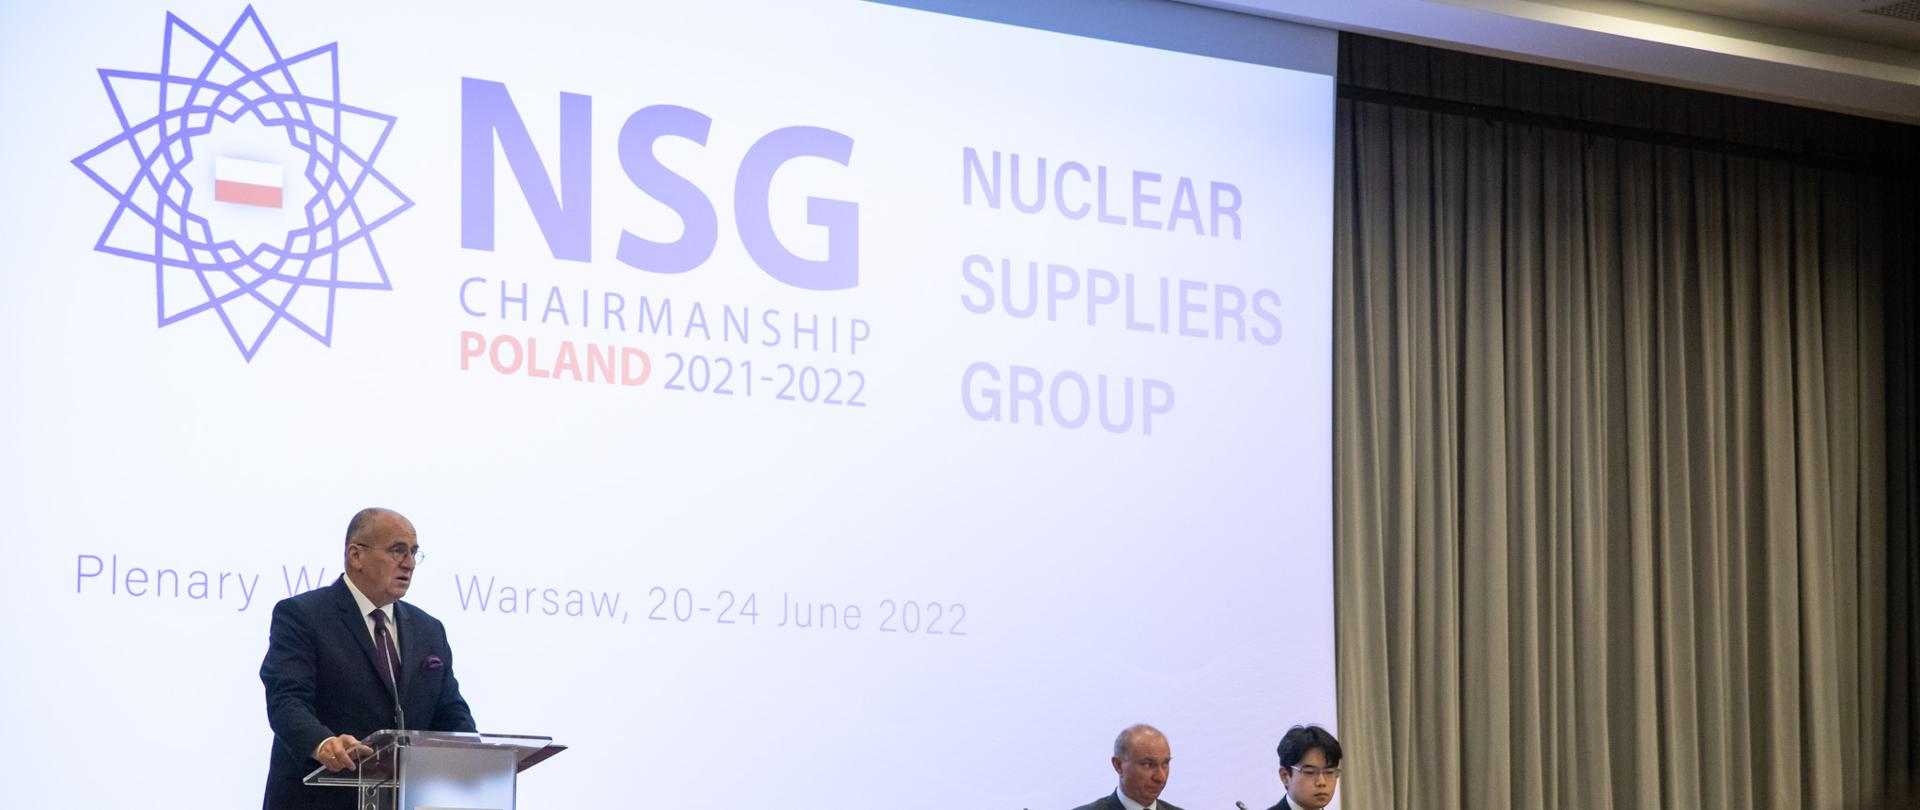 Meeting of Nuclear Suppliers Group